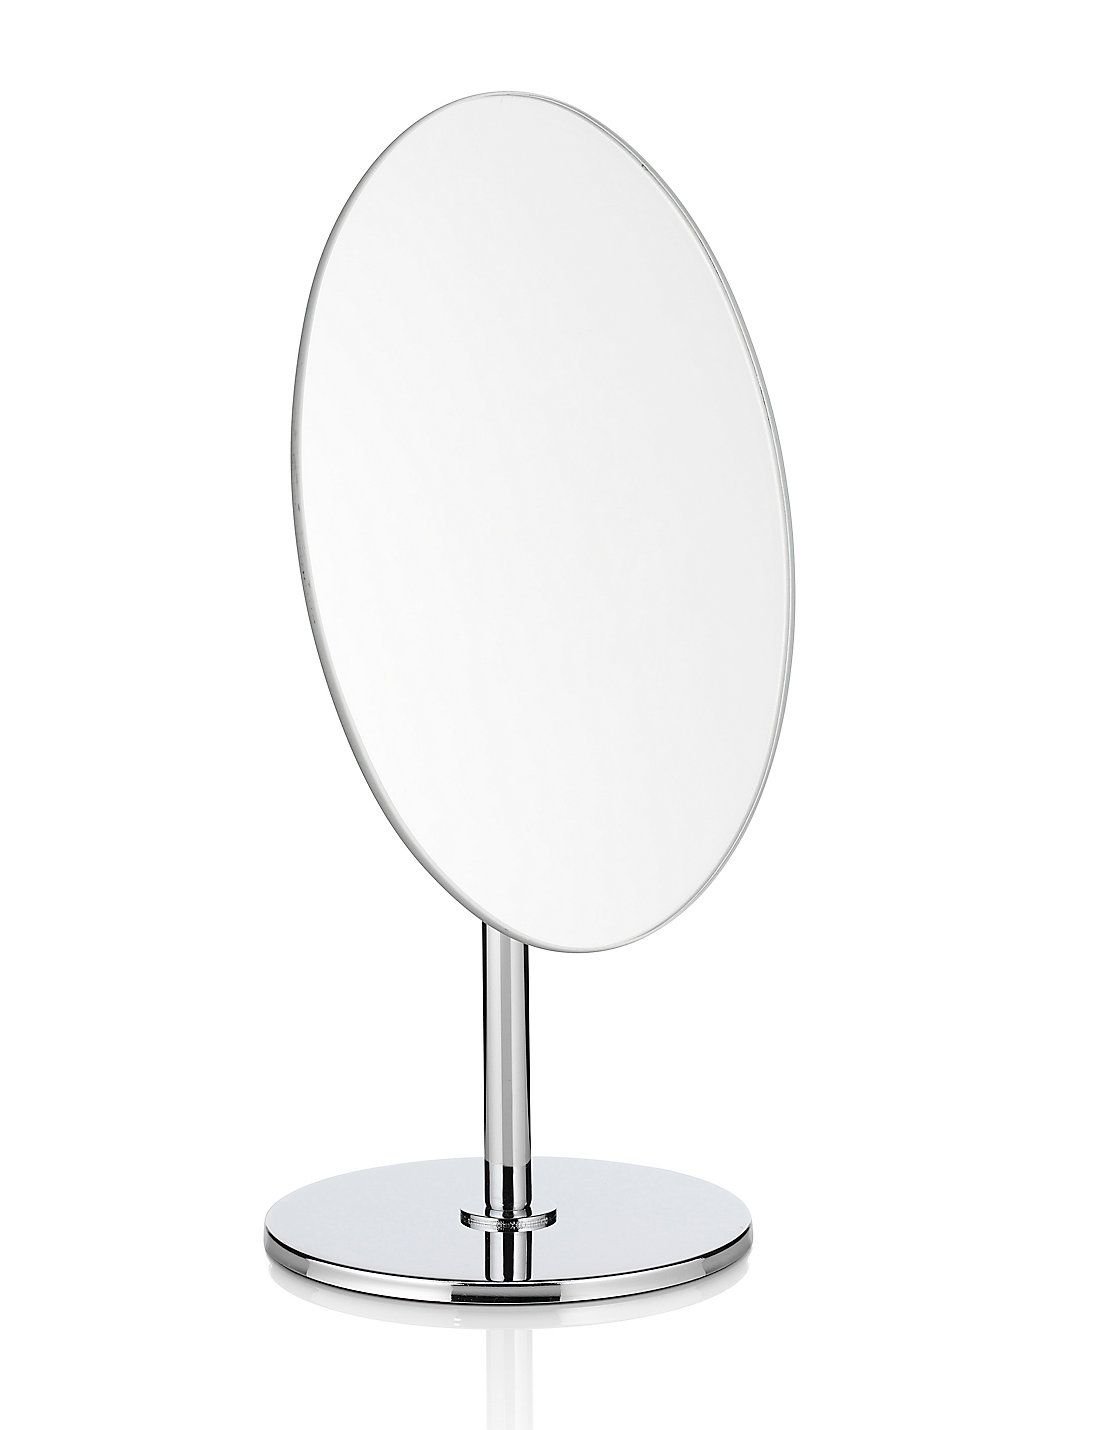 Large Free Standing Bathroom Mirrors Home With Regard To Oval Freestanding Mirror (View 9 of 15)